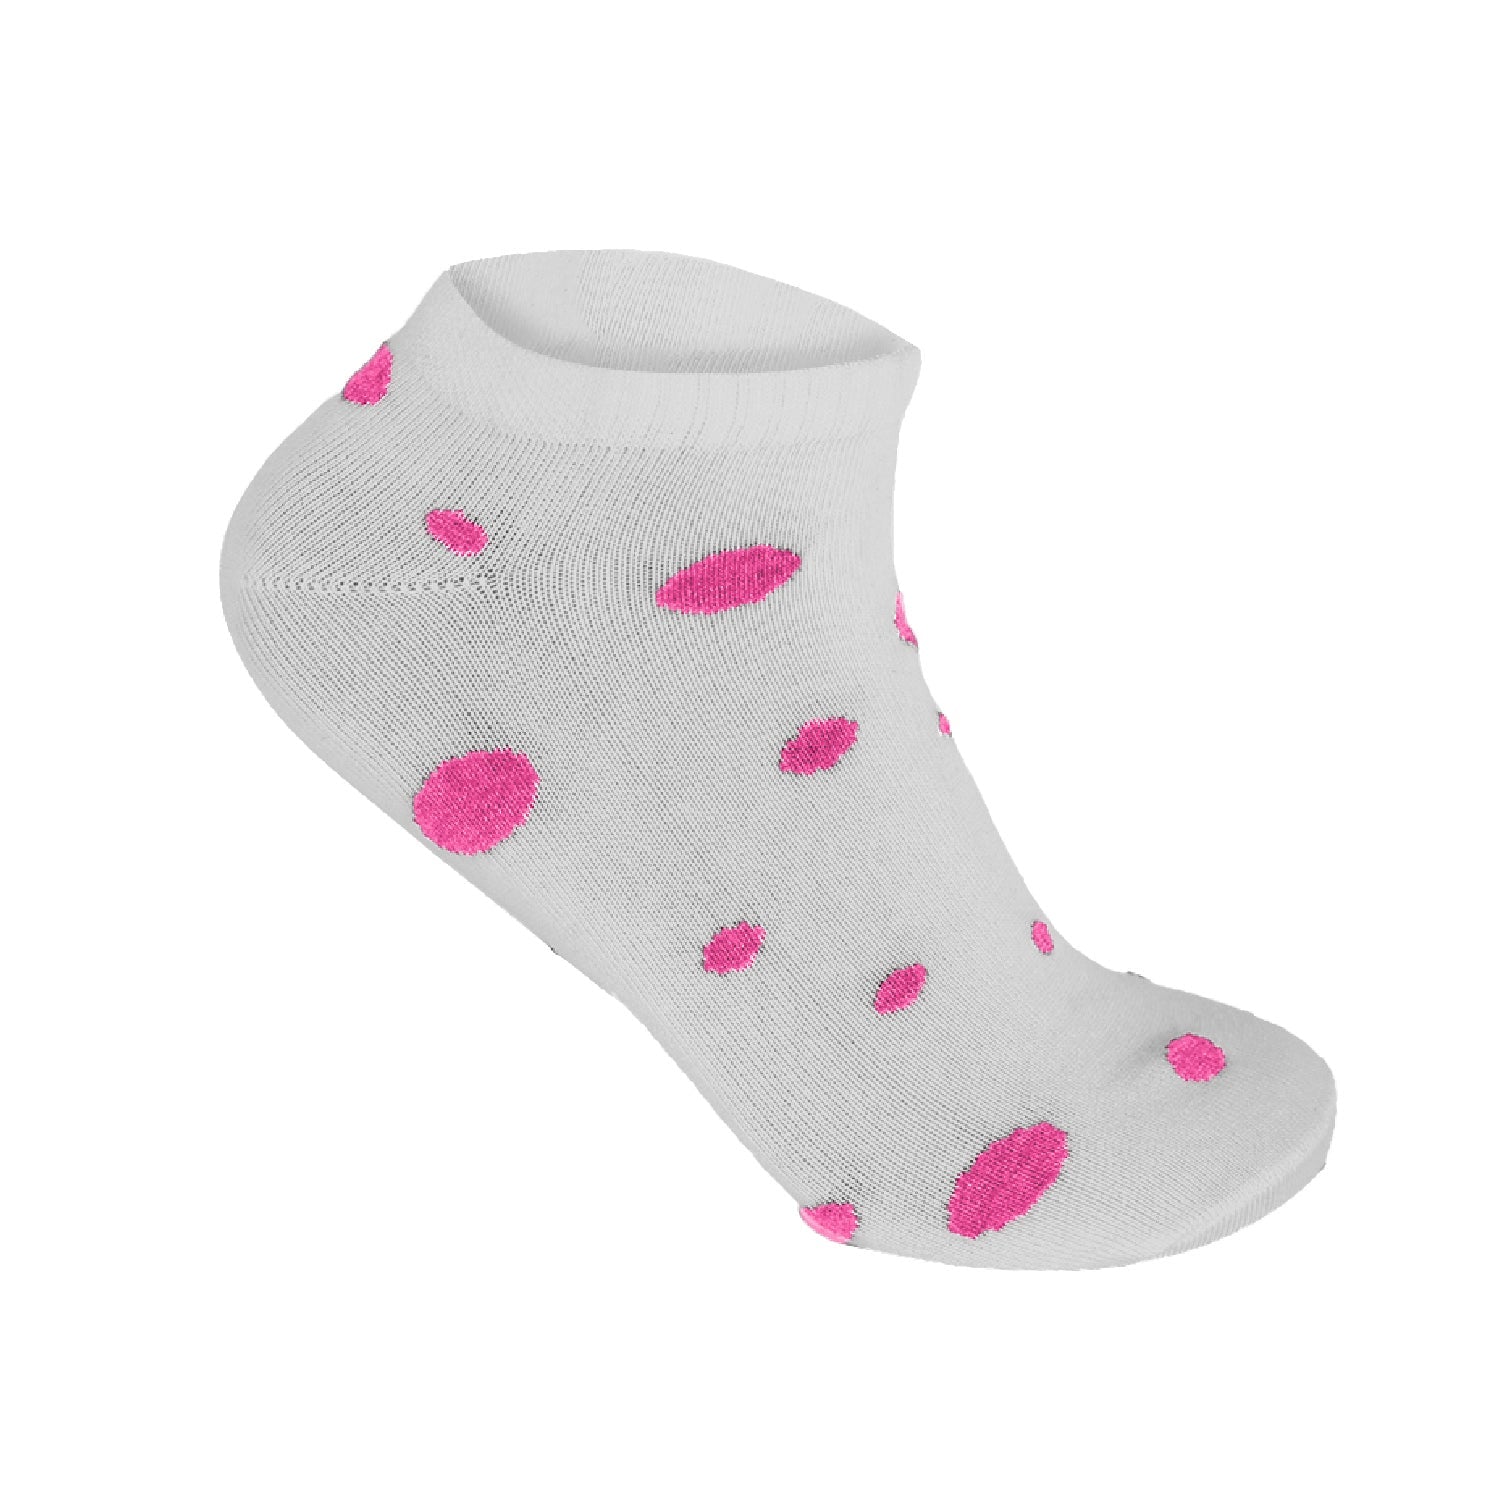 ACTIV WOMEN SOCKS PACKAGE *3 - COLORS A-935 Activ Abou Alaa